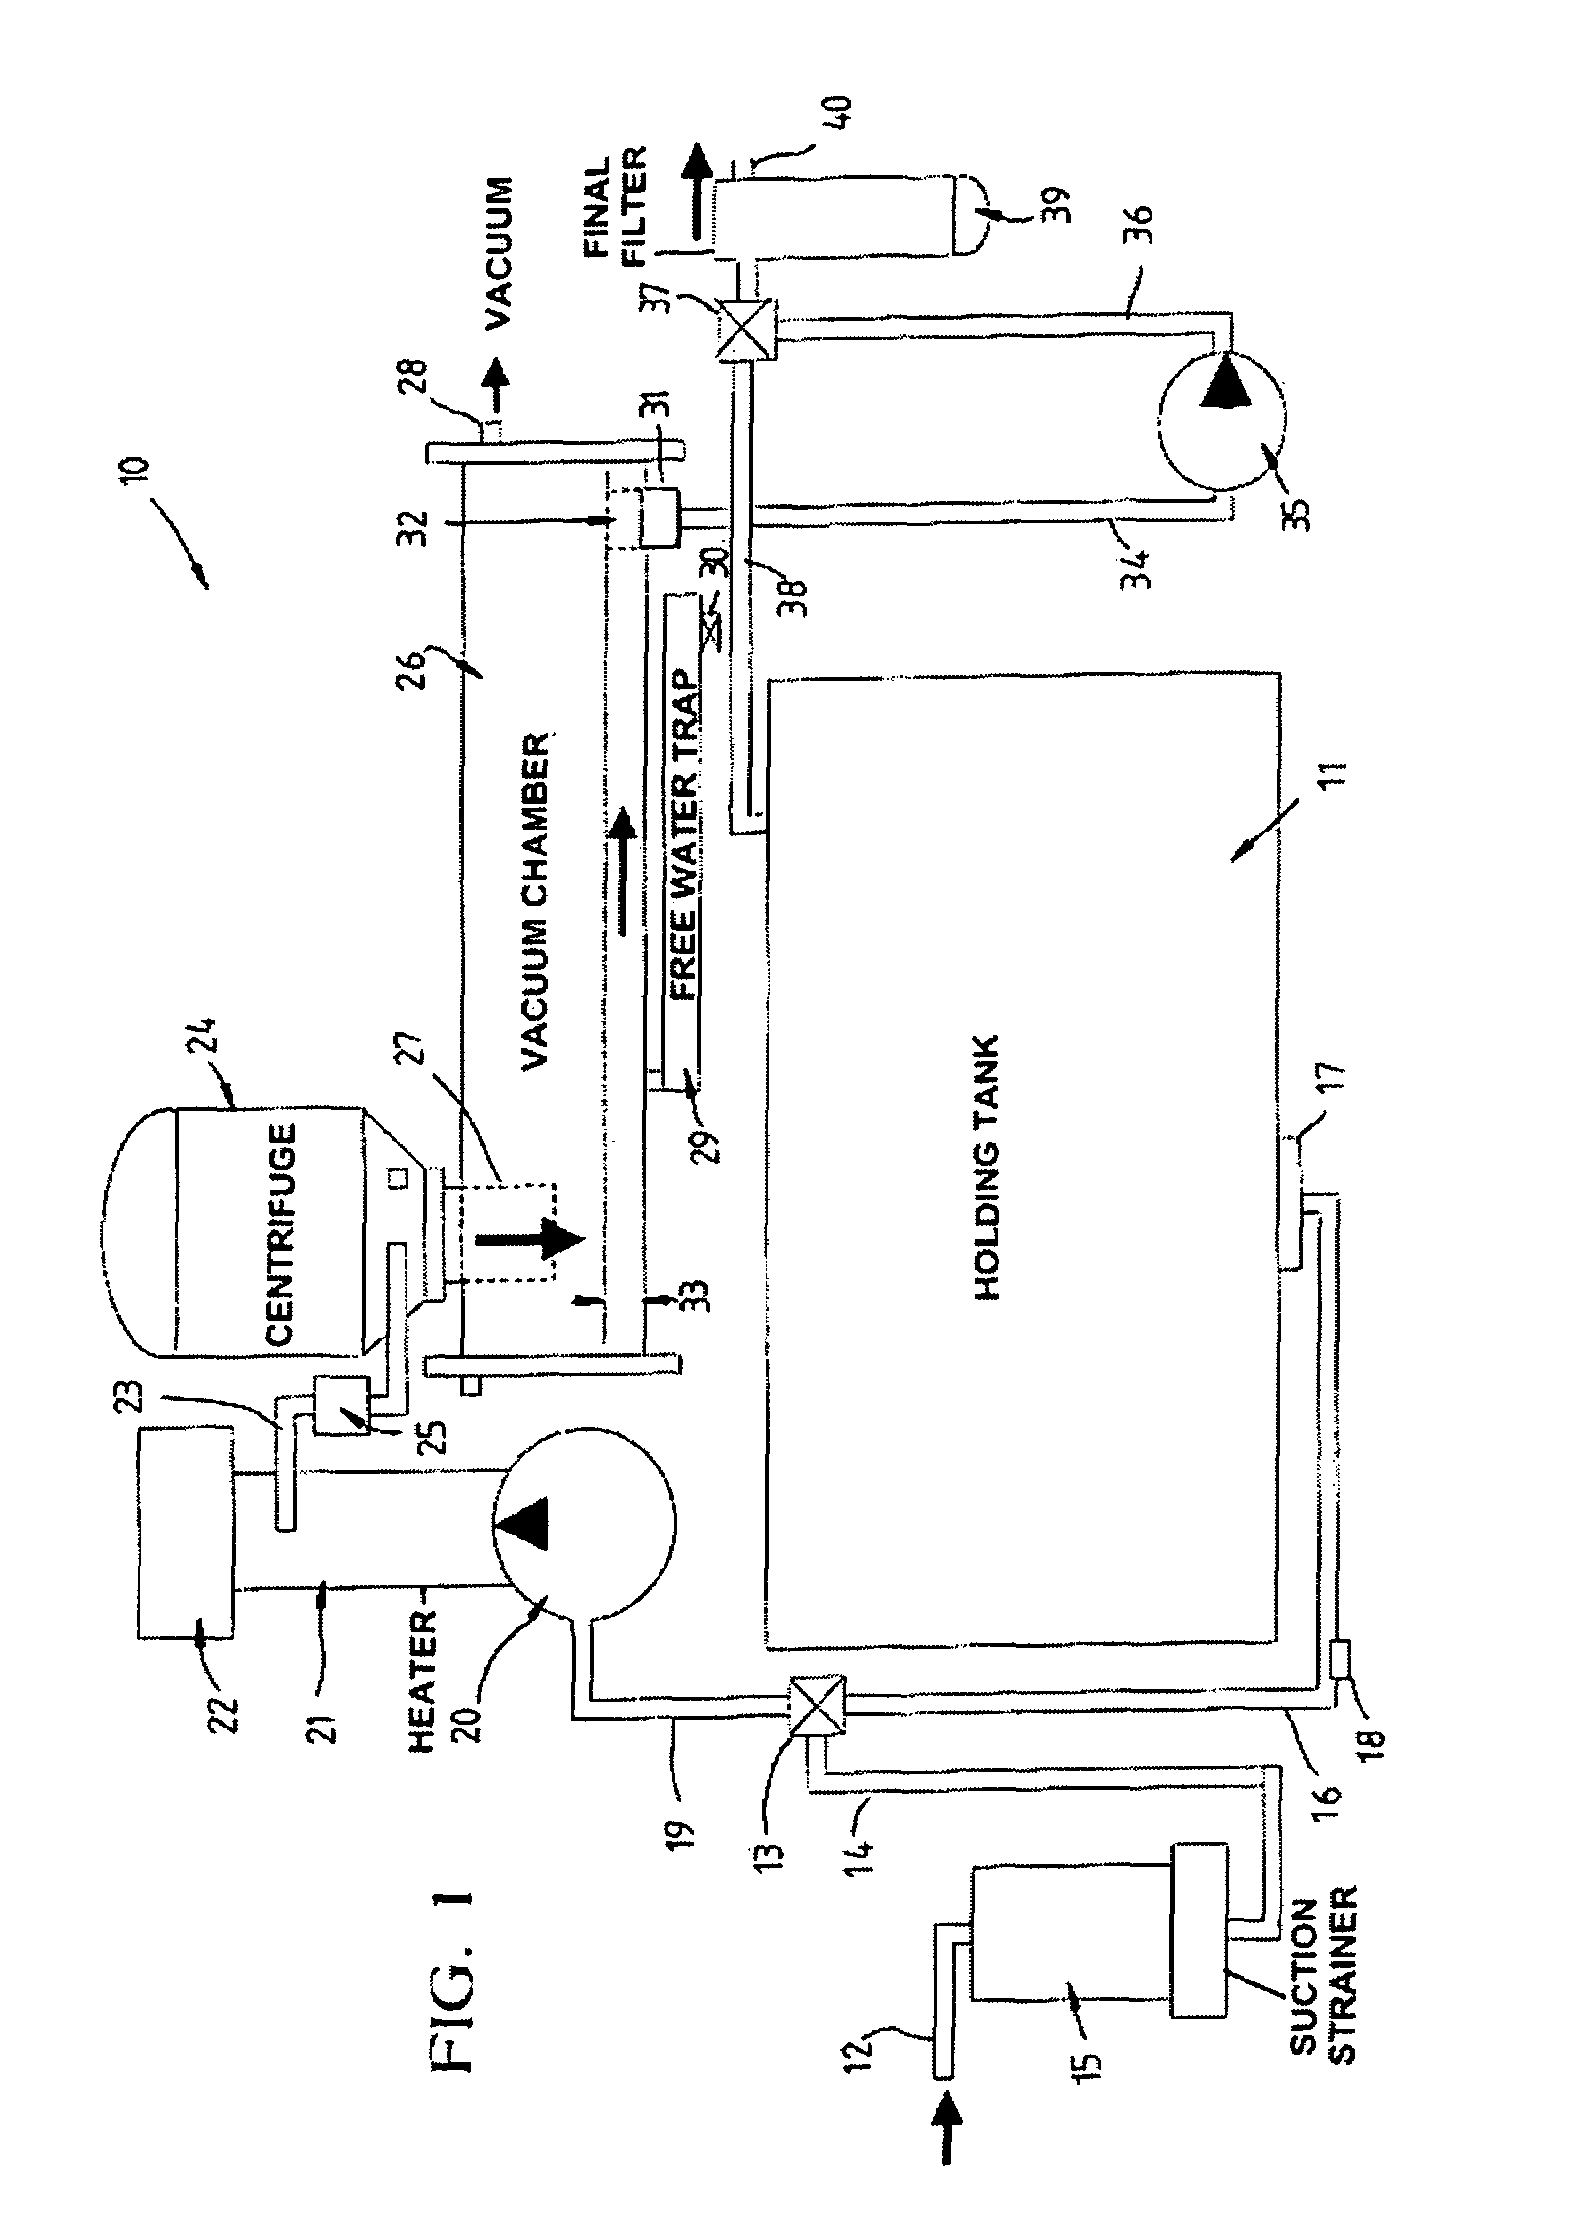 Apparatus for cleaning contaminated oil